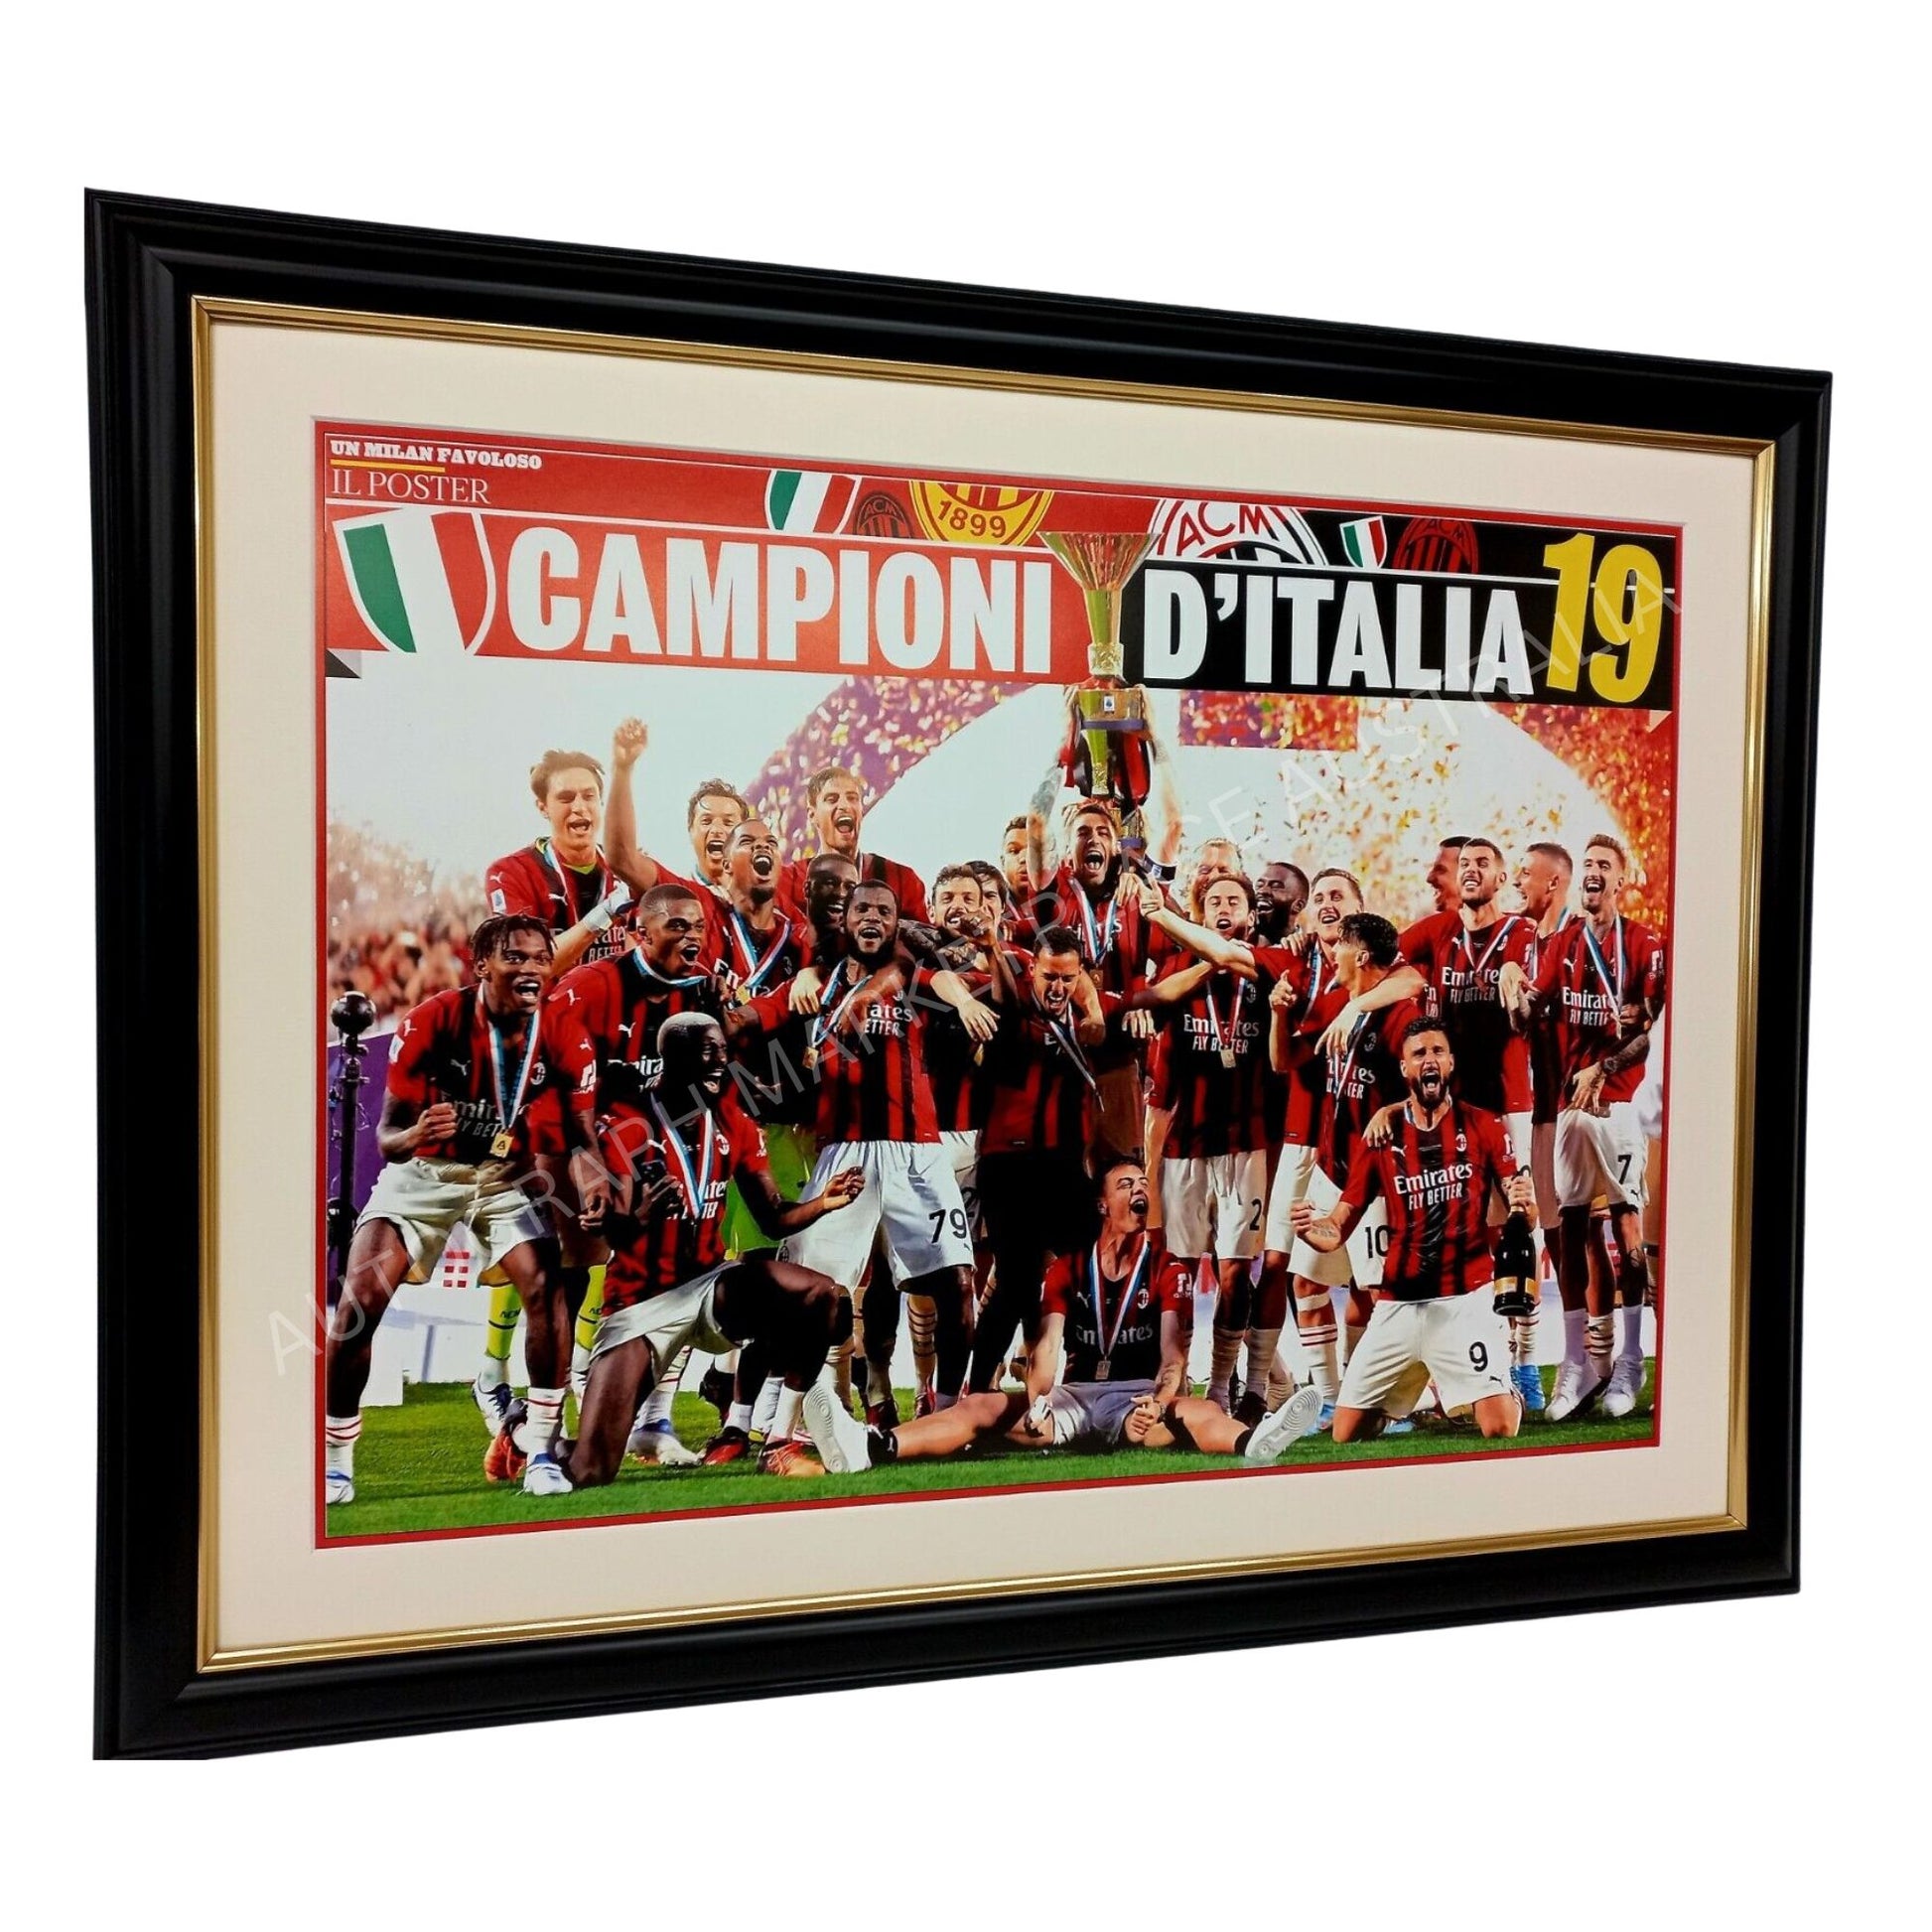 AC Milan 2021/2022 Serie A Champions D'Italia Celebration Framed Poster Photo